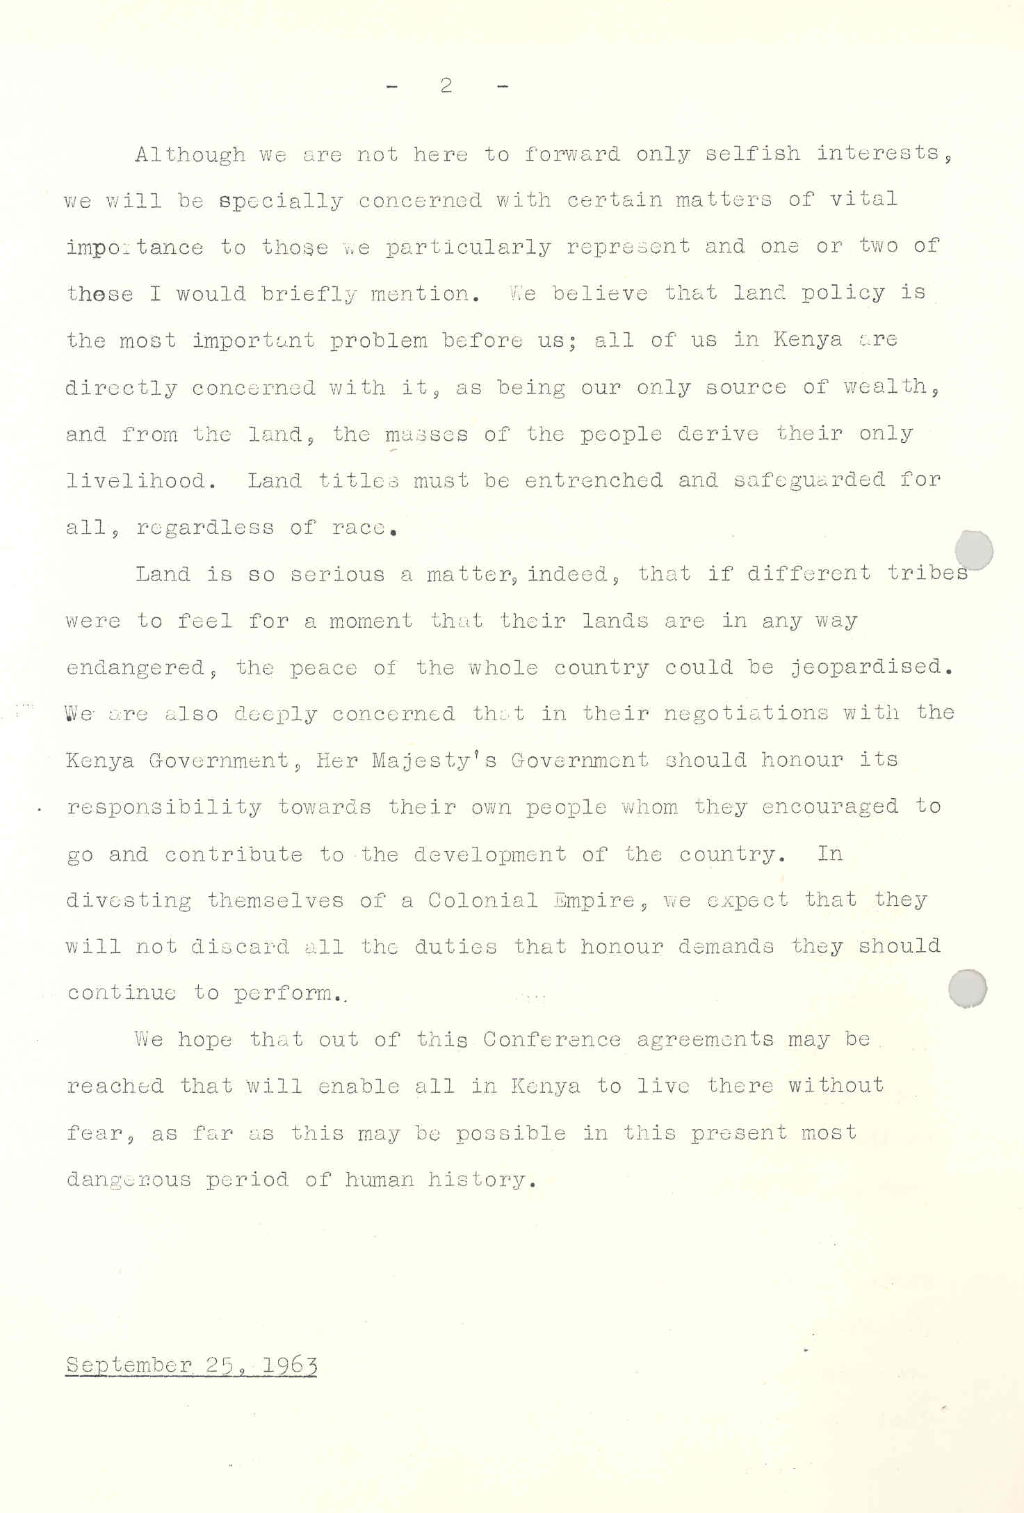 Speech by Mr L.R.H. Welwood at the Kenya Independence Conference, 1963